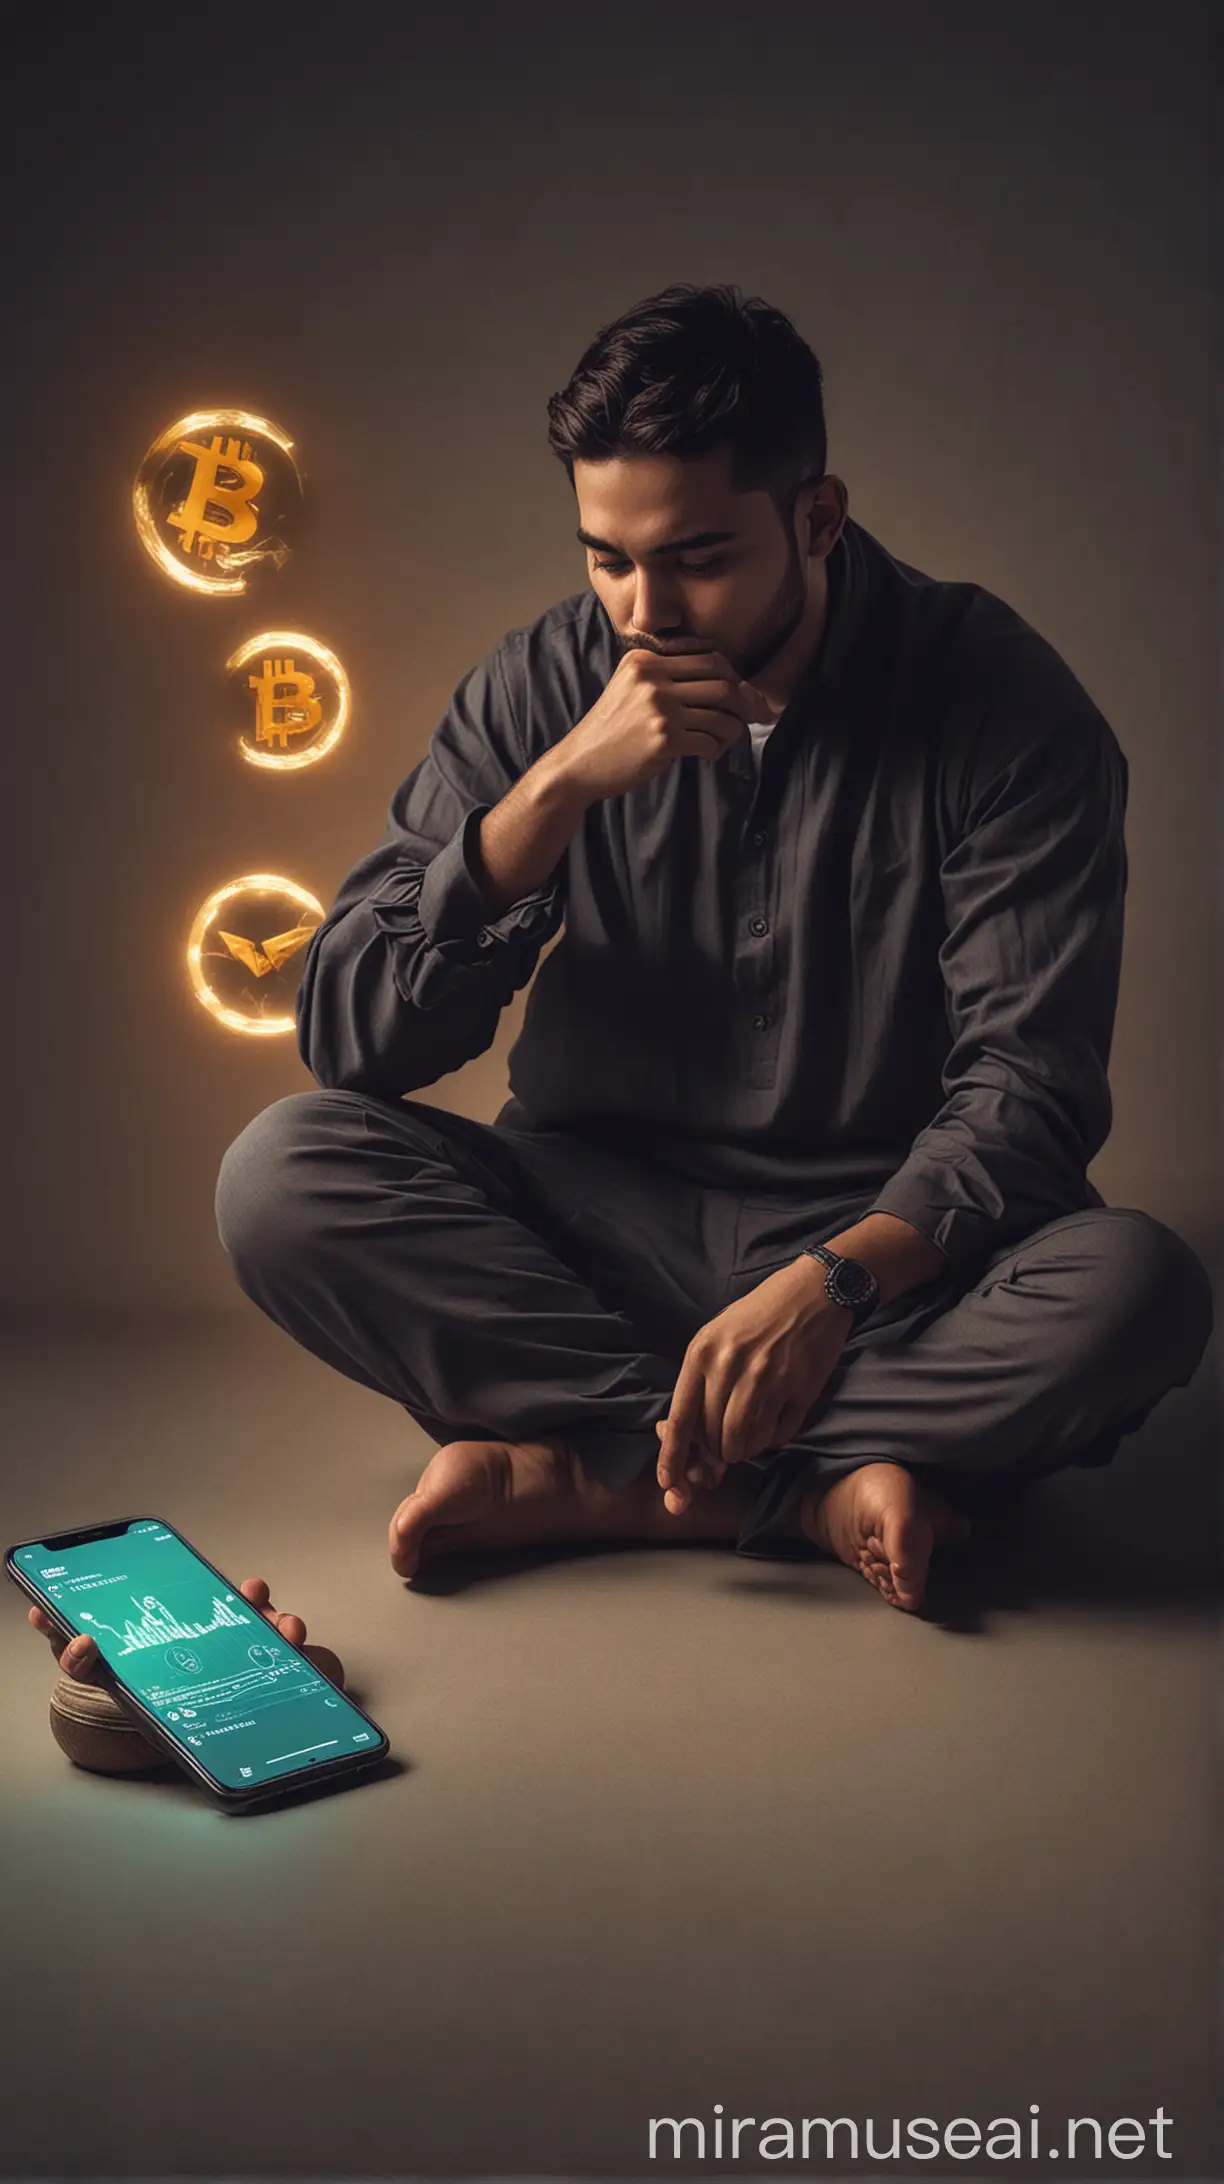  An illustration of a person contemplating while looking at a smartphone with cryptocurrency charts.
Description: A person sits cross-legged, holding a smartphone displaying cryptocurrency charts. Their thoughtful expression reflects the contemplation of whether cryptocurrency investments align with Islamic finance principles, WITH ISLAMIC TRADITION AND HD 4K 